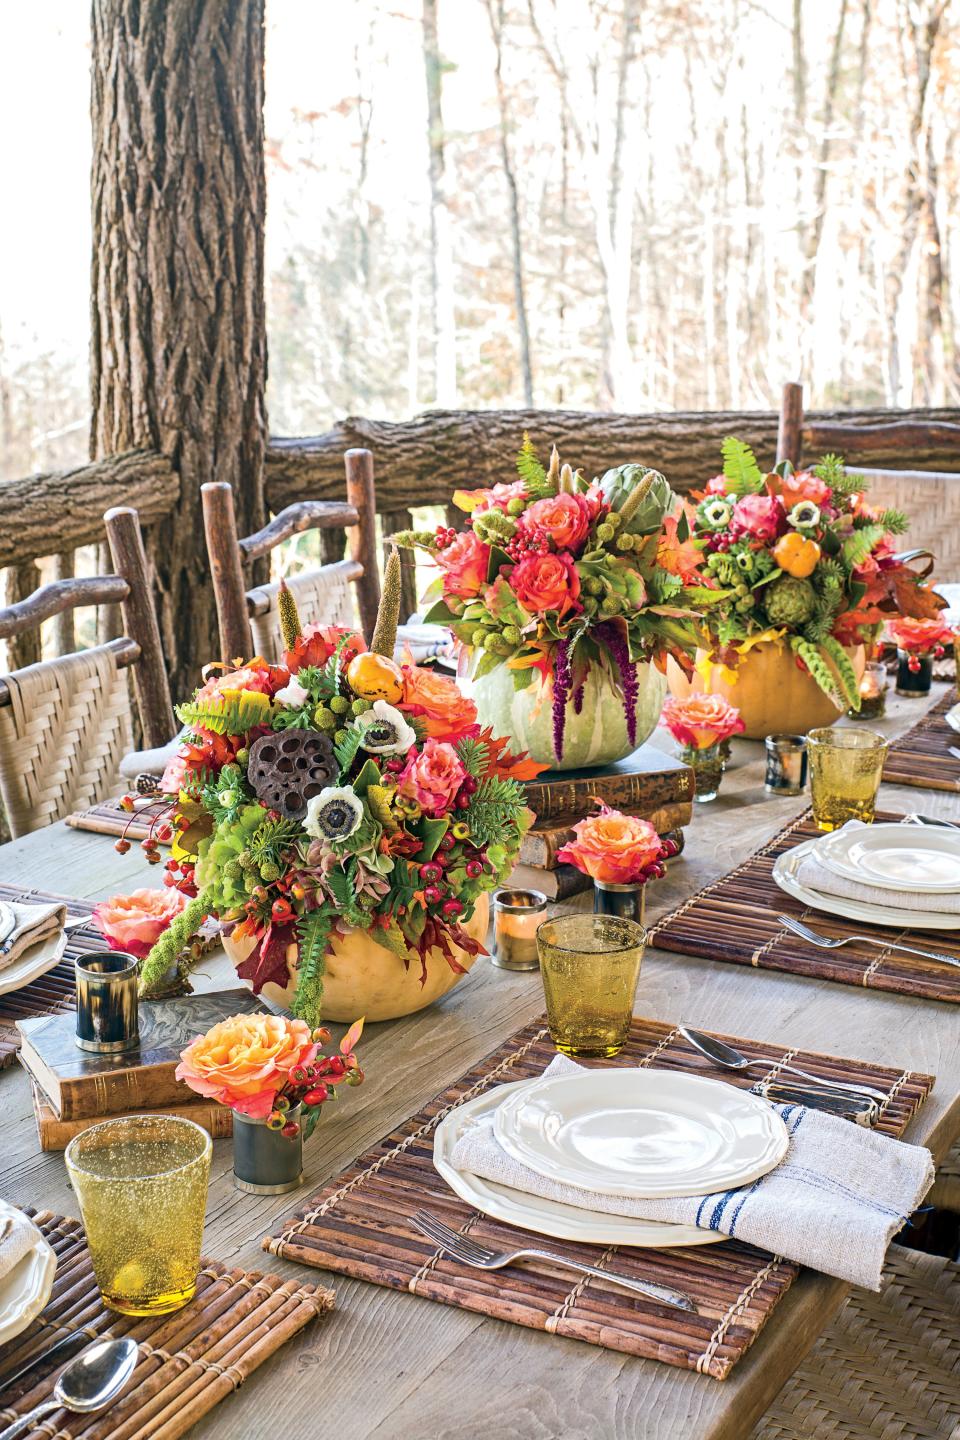 Let Nature Inspire Your Table